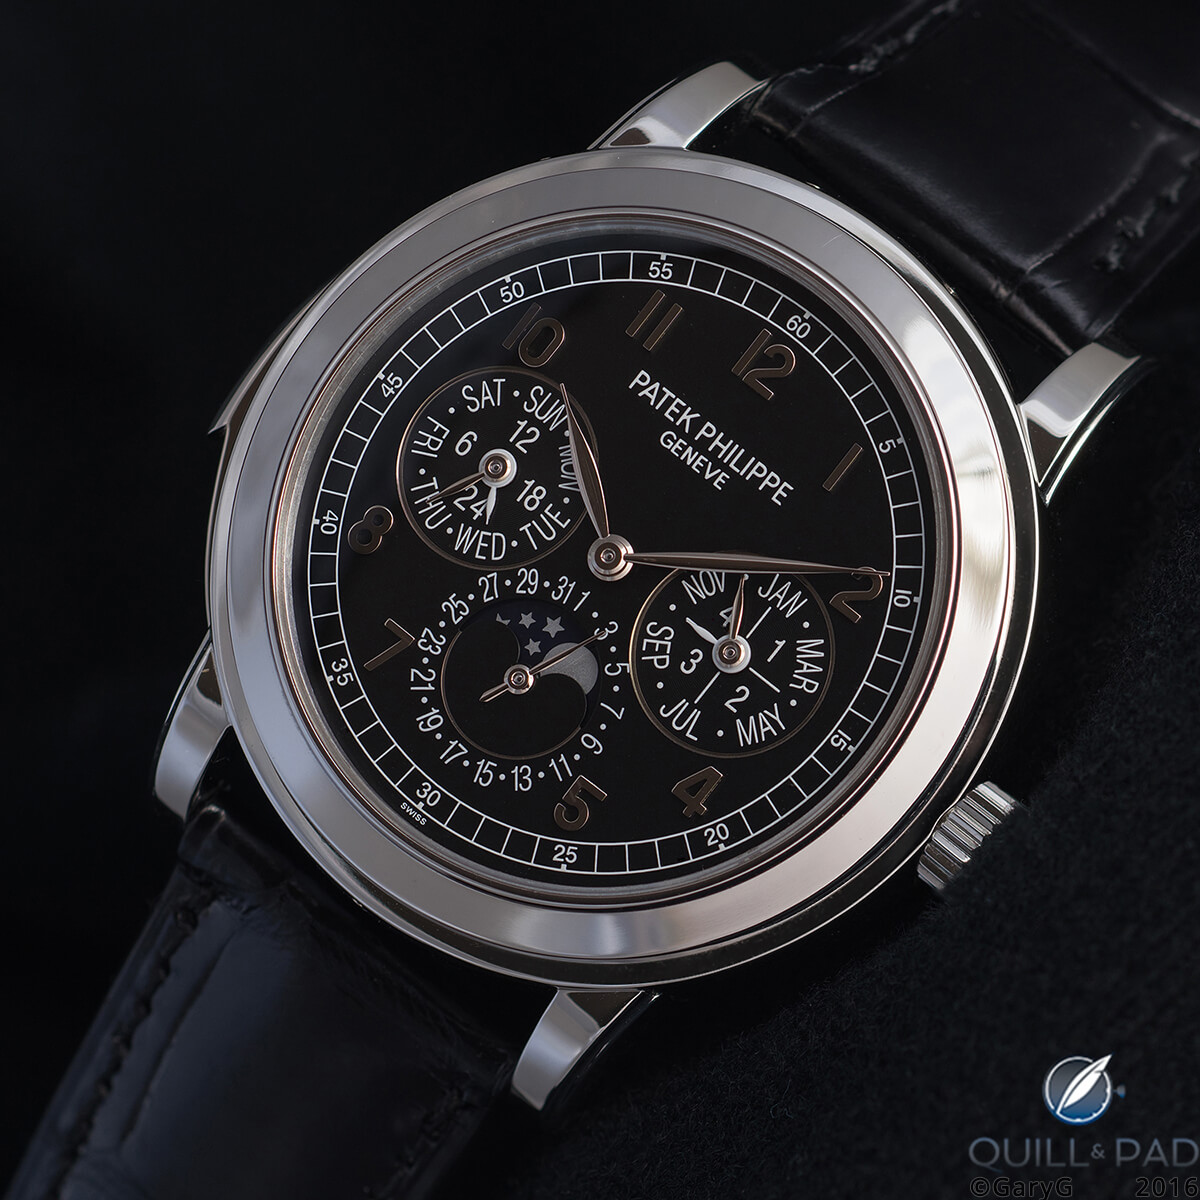 Imposing presence: high-contrast photo of the Patek Philippe Reference 5074P